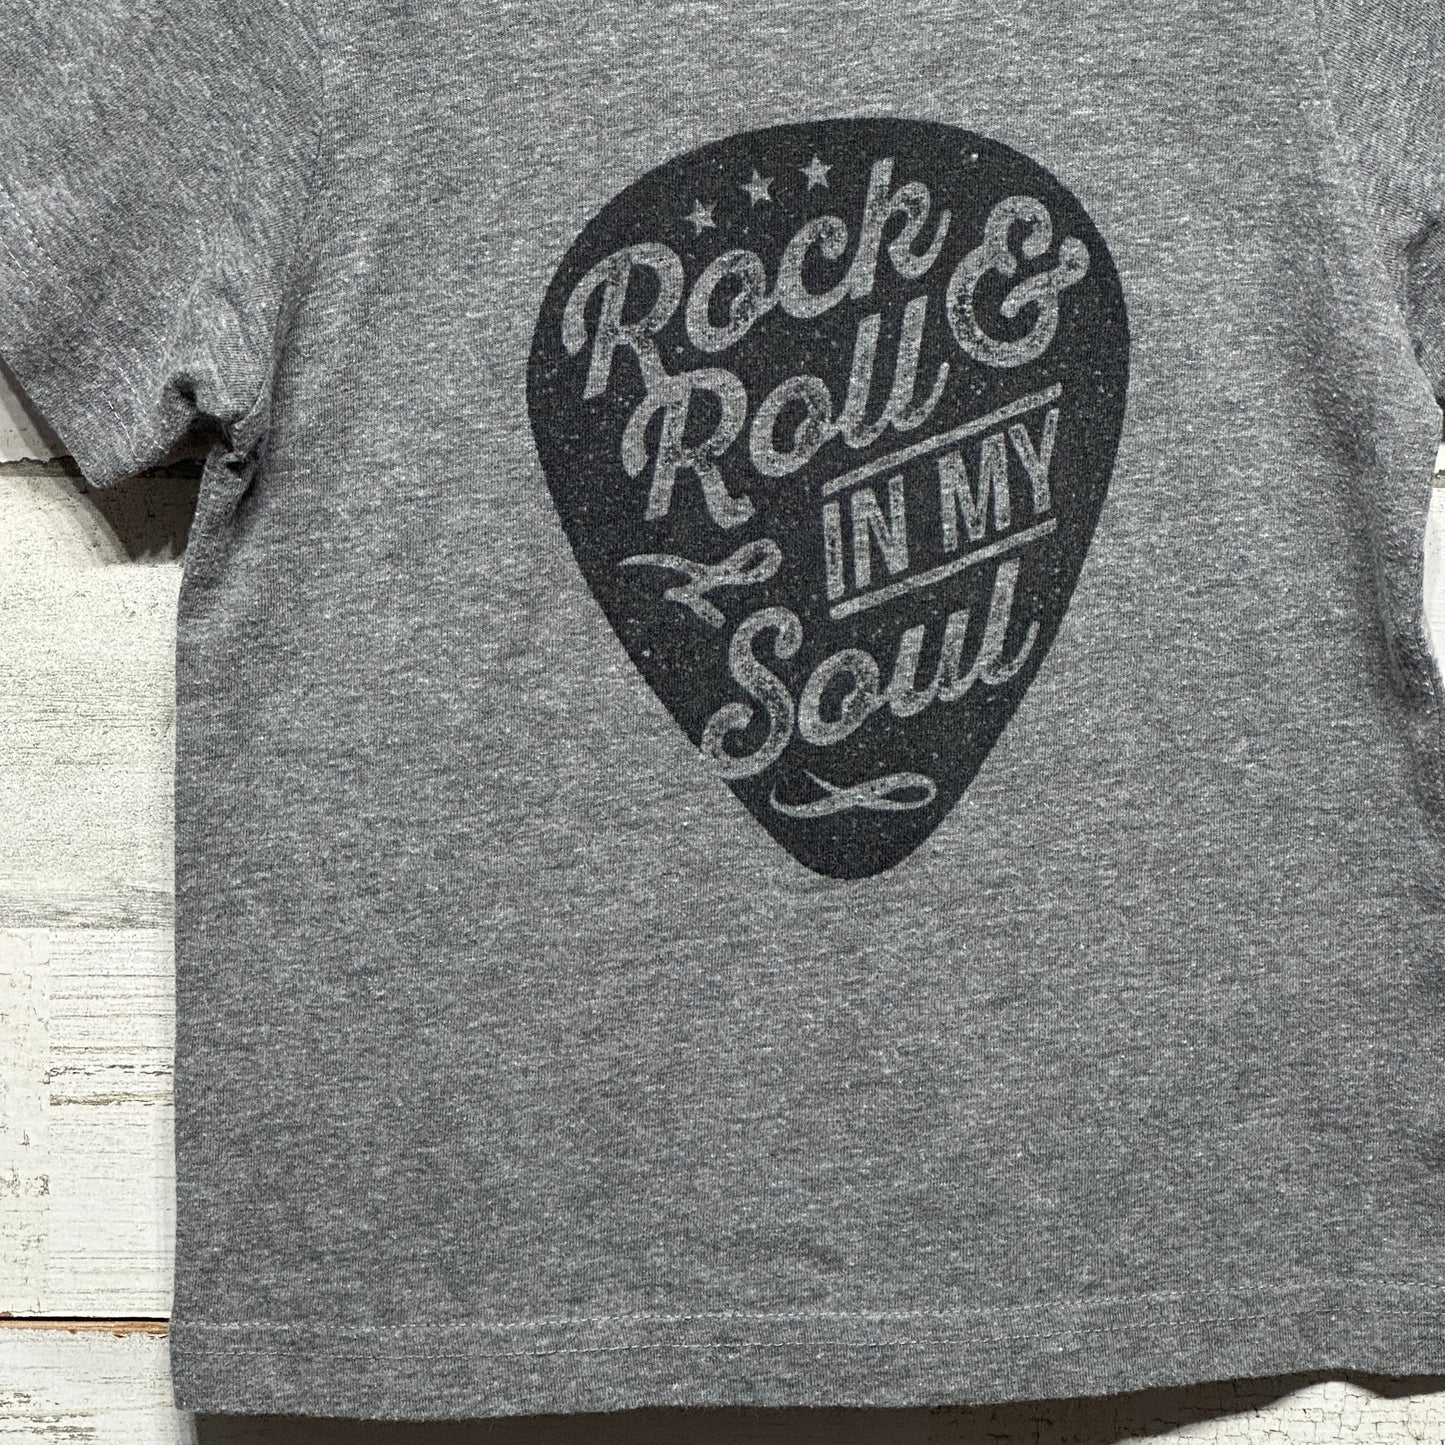 Size 2 Rabbit Skins Rock and Roll in my Soul Tee - Good Used Condition